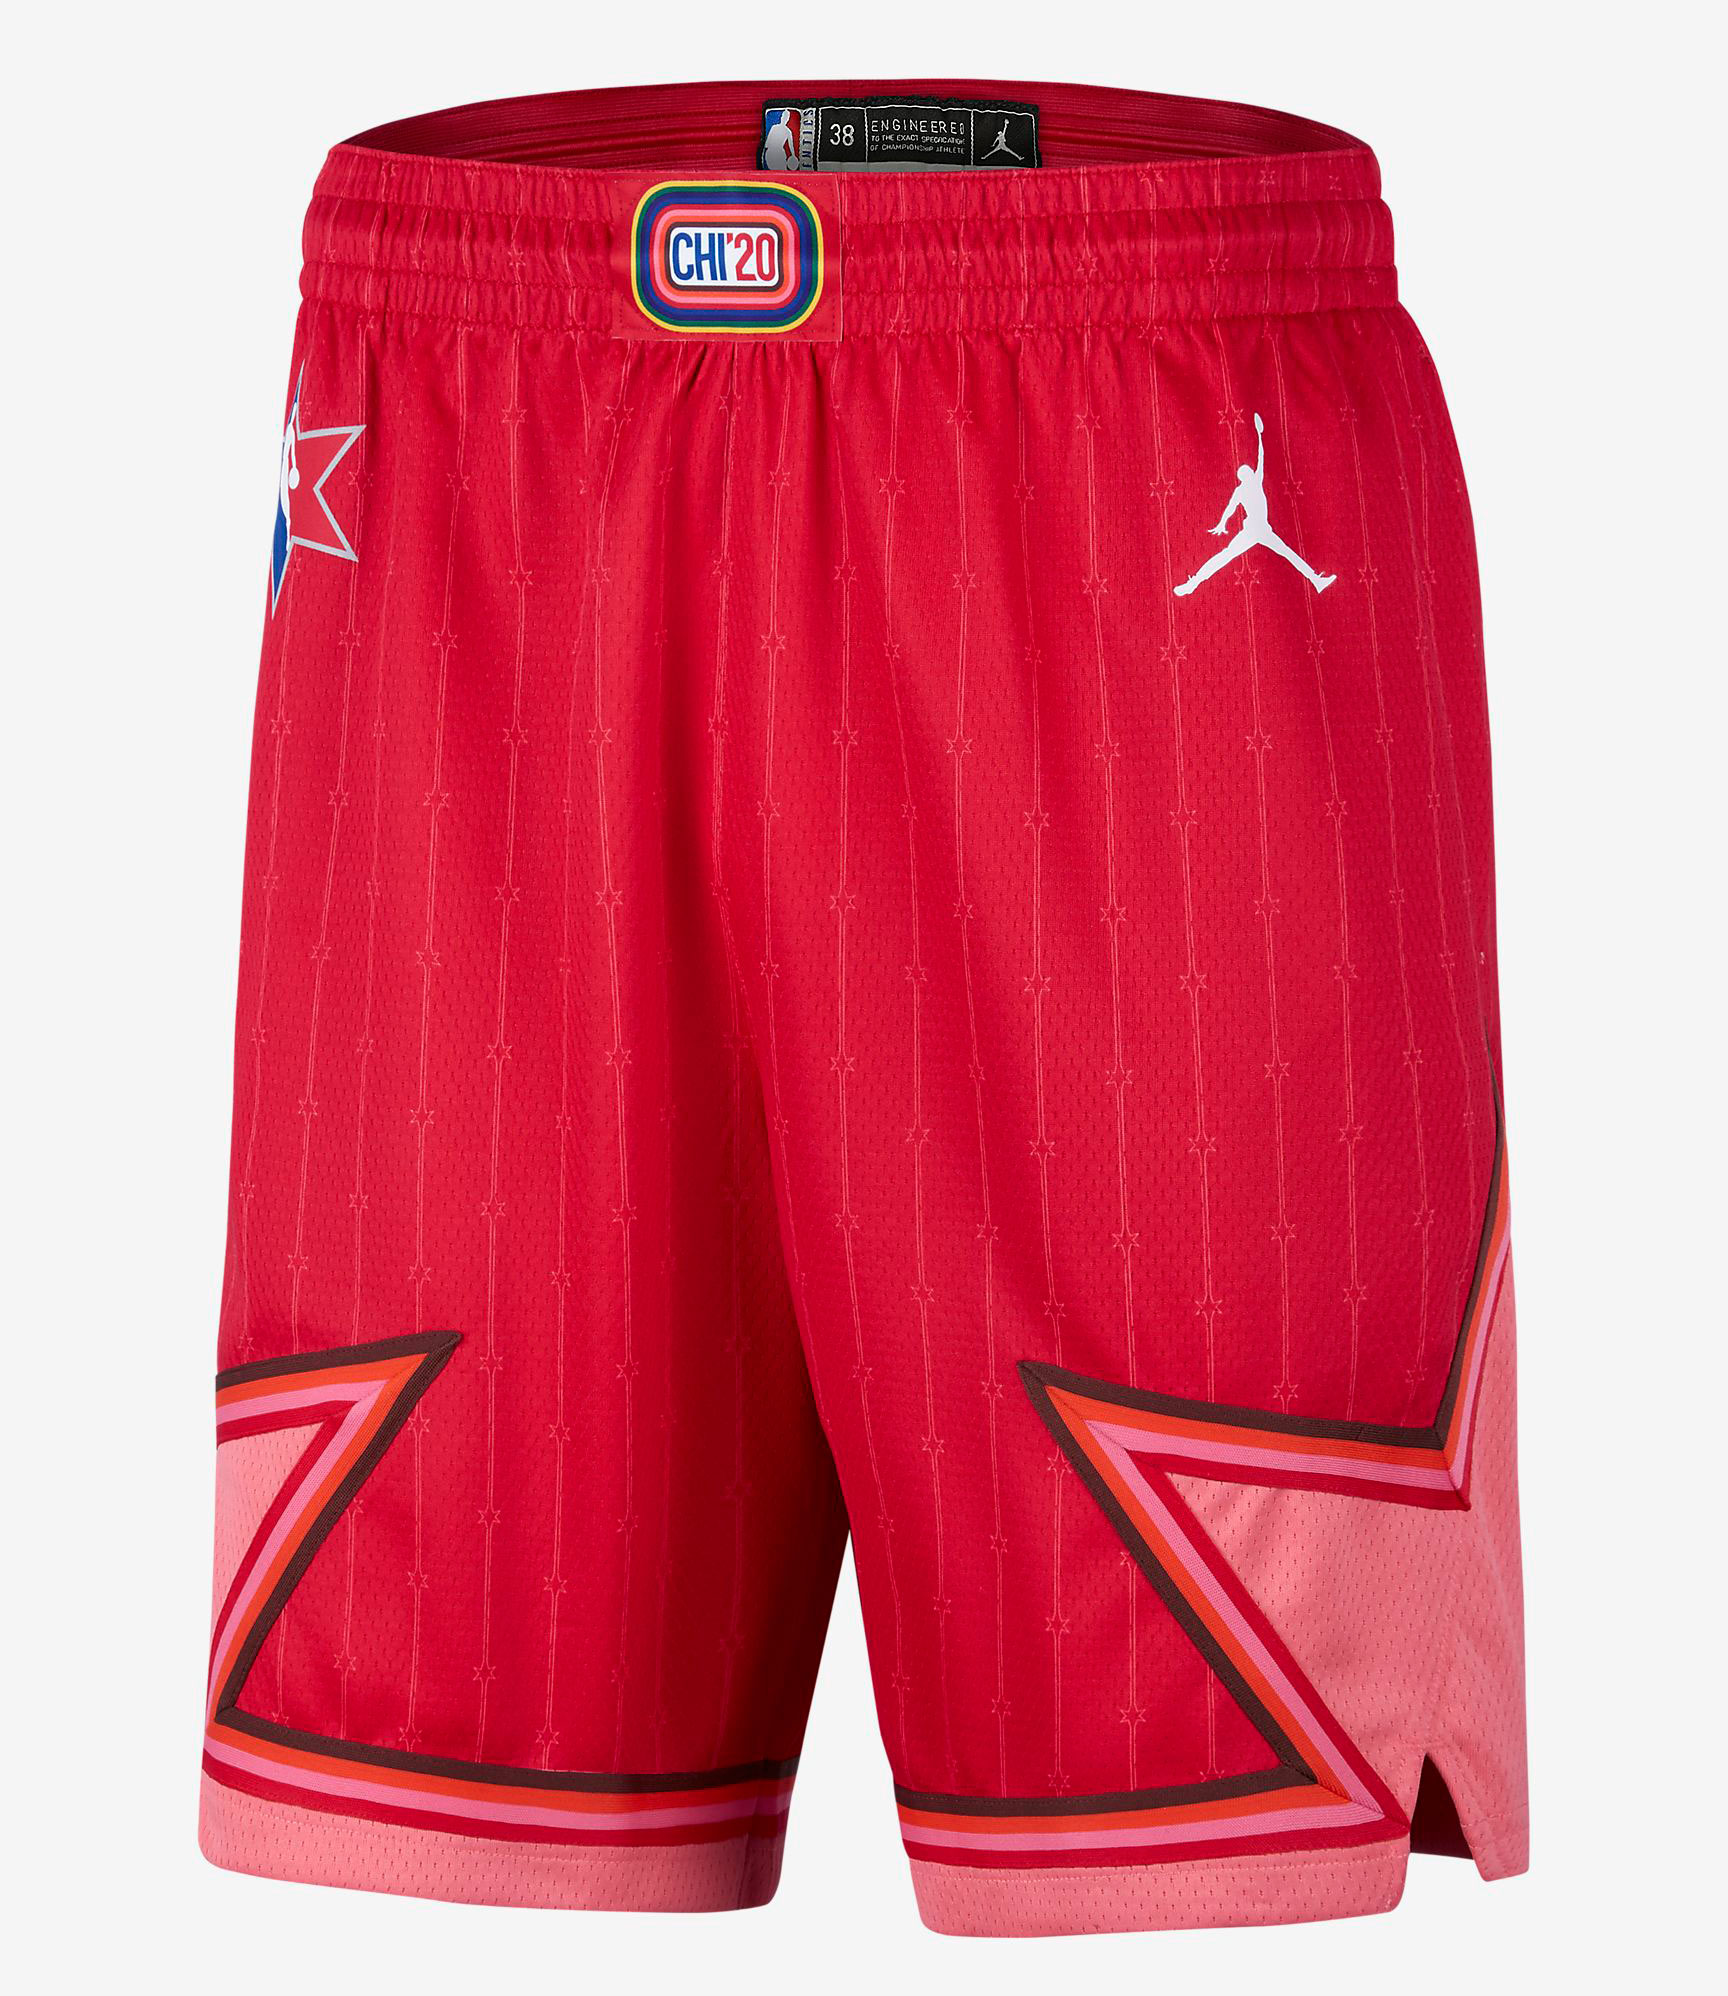 2020-nba-all-star-game-red-shorts